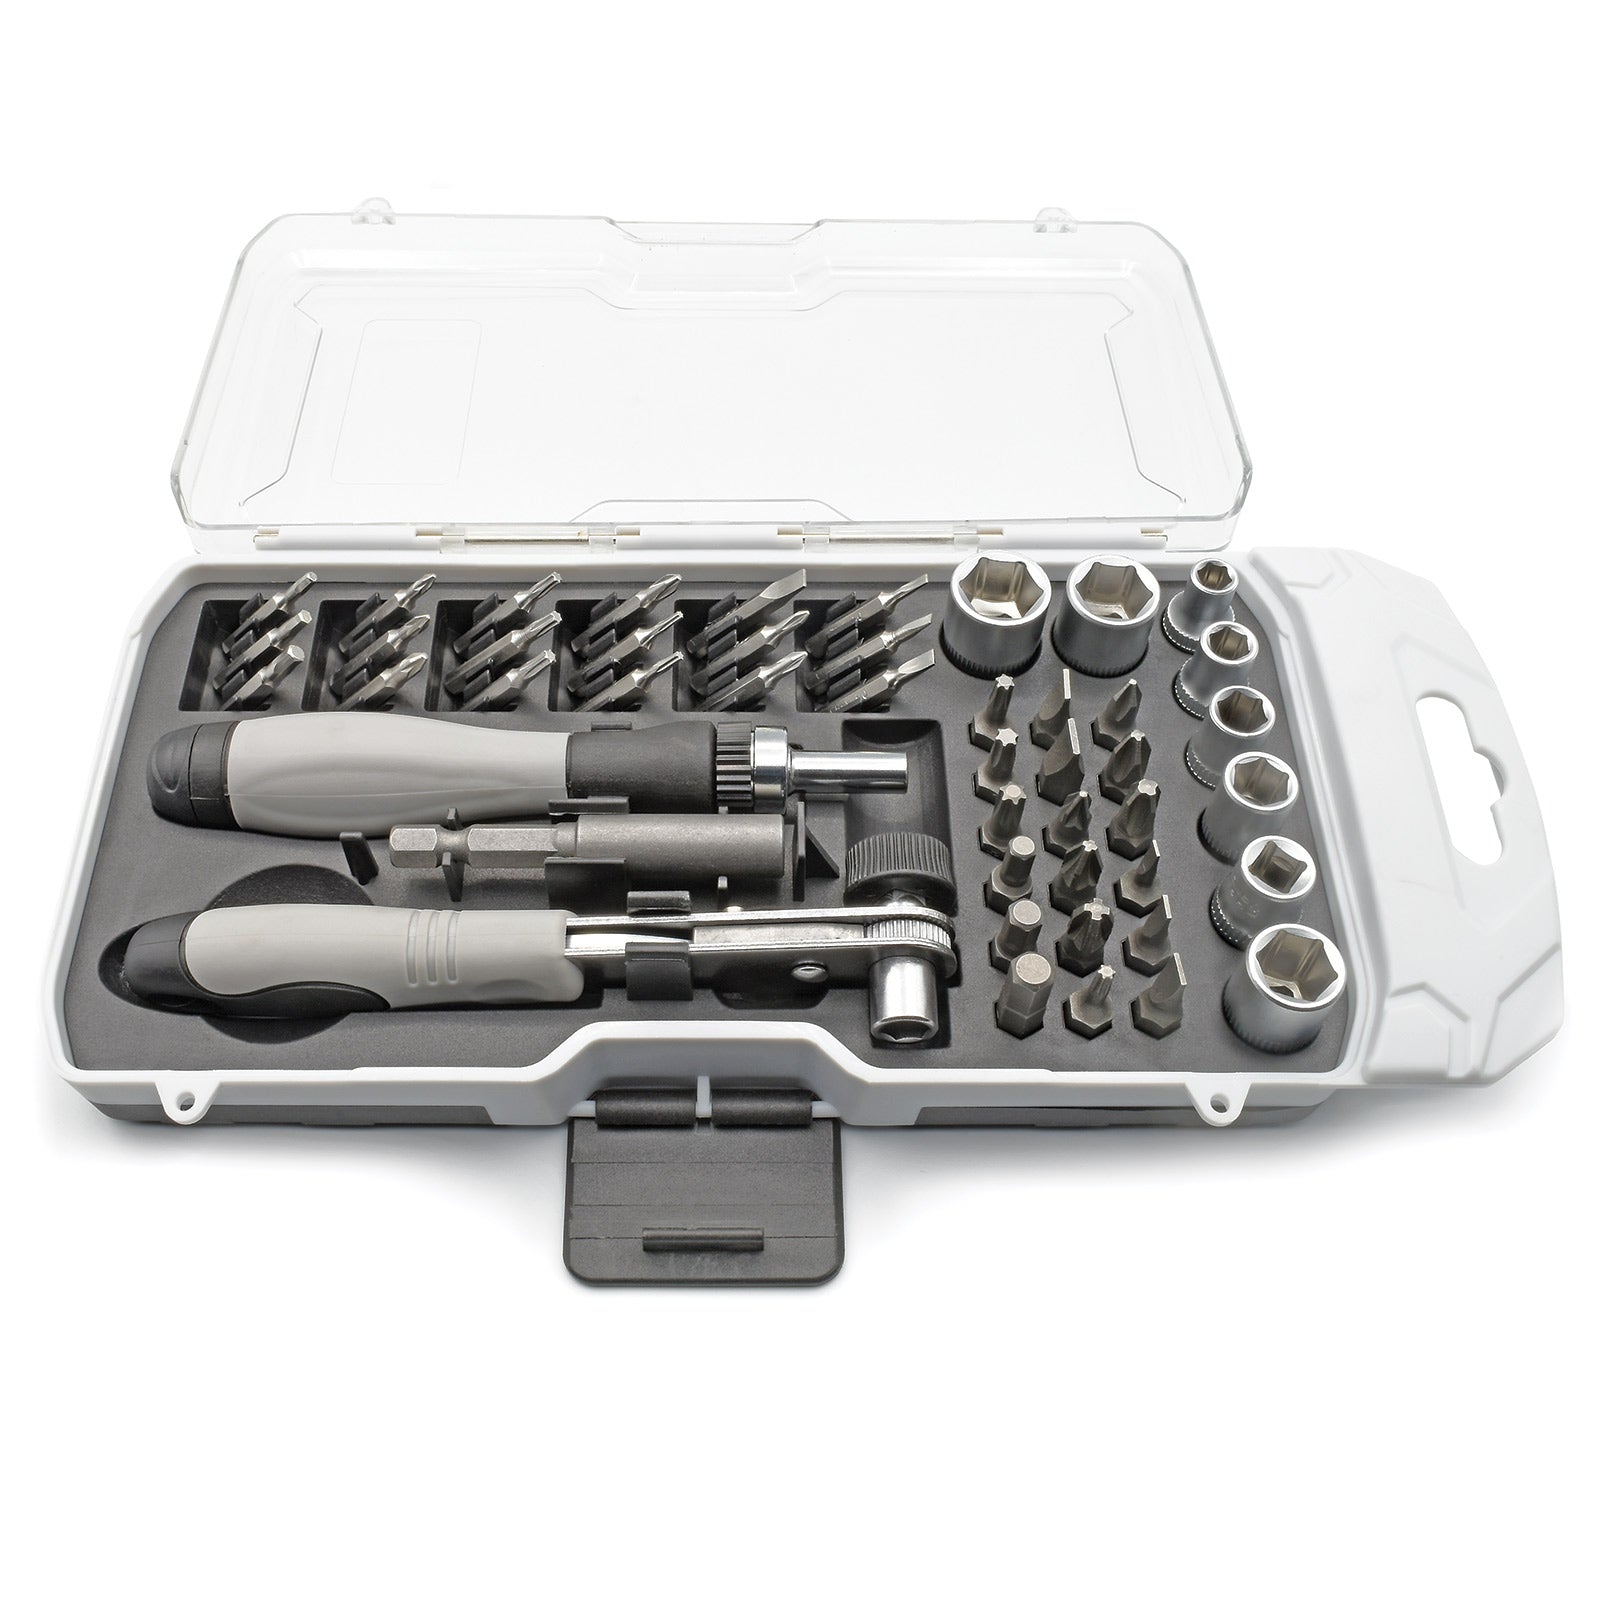 Ratchet Screwdriver / Wrench Combo Set